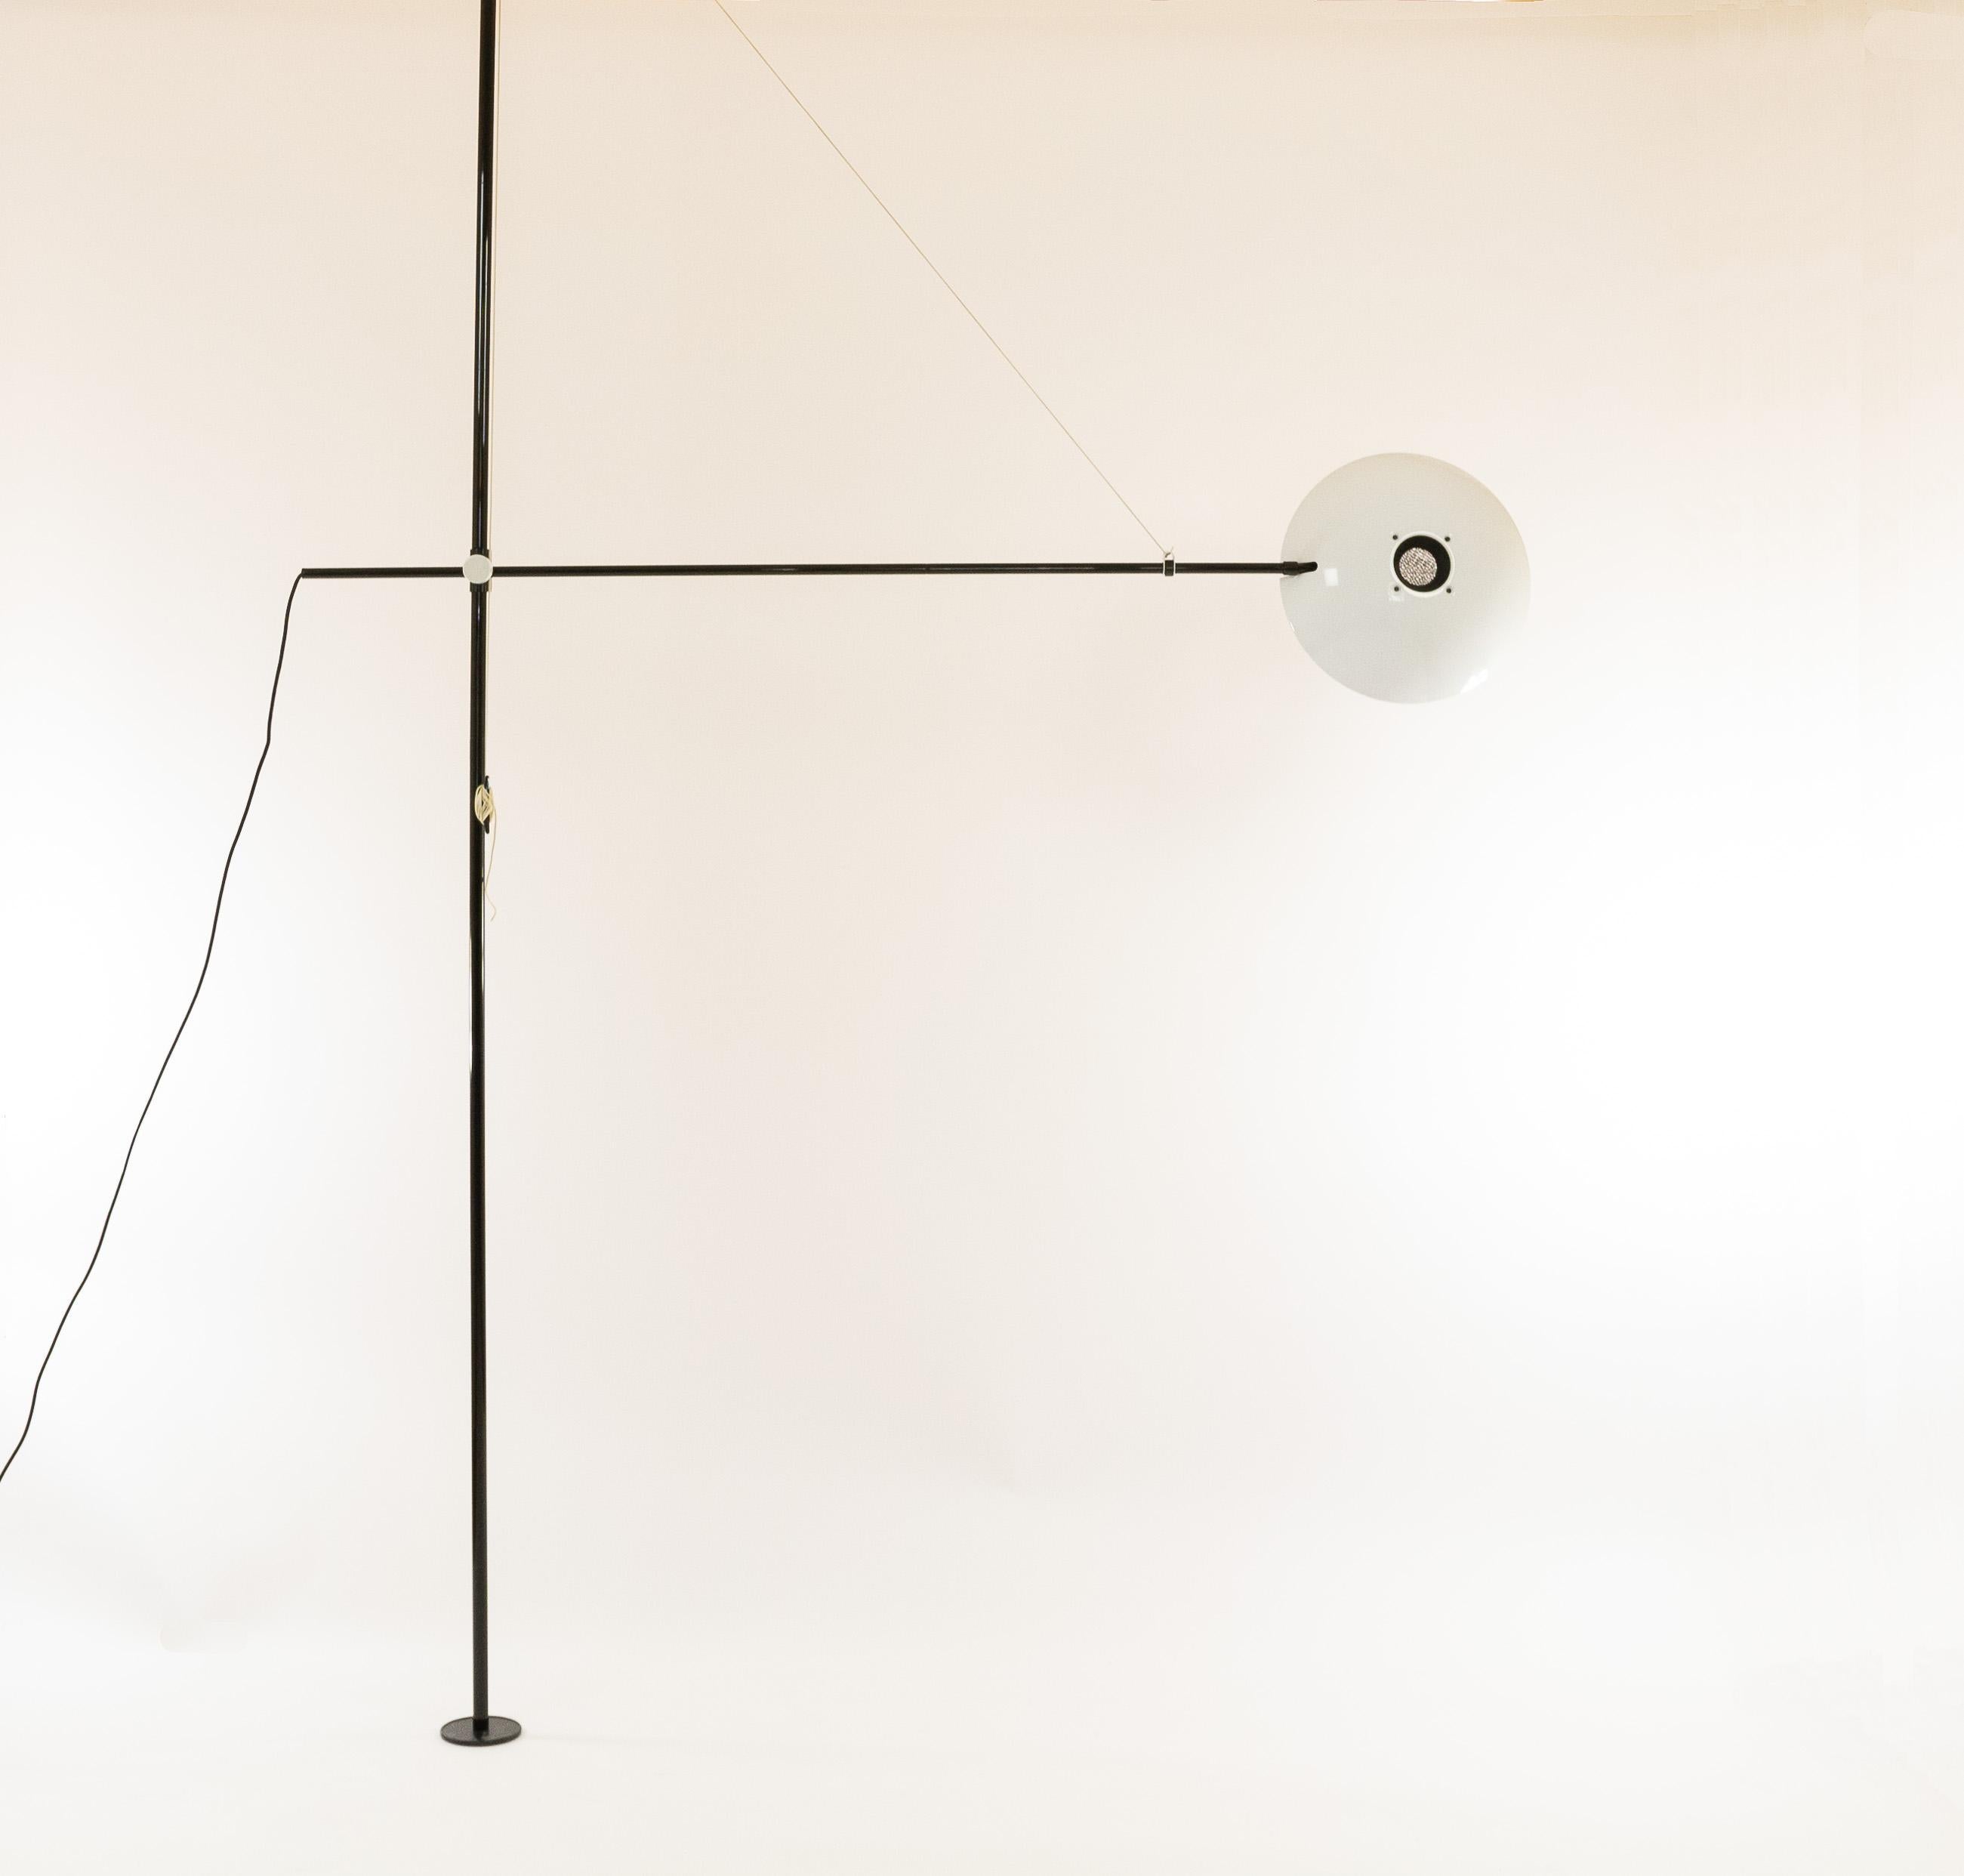 Fully adjustable Bigo floor to ceiling lamp by S.T. Valenti for Italian manufacturer Valenti Luci, 1981

Bigo is a halogen floor lamp equipped with a system of telescopic tubes to enable the column to be fixed between ceiling and floor. The total